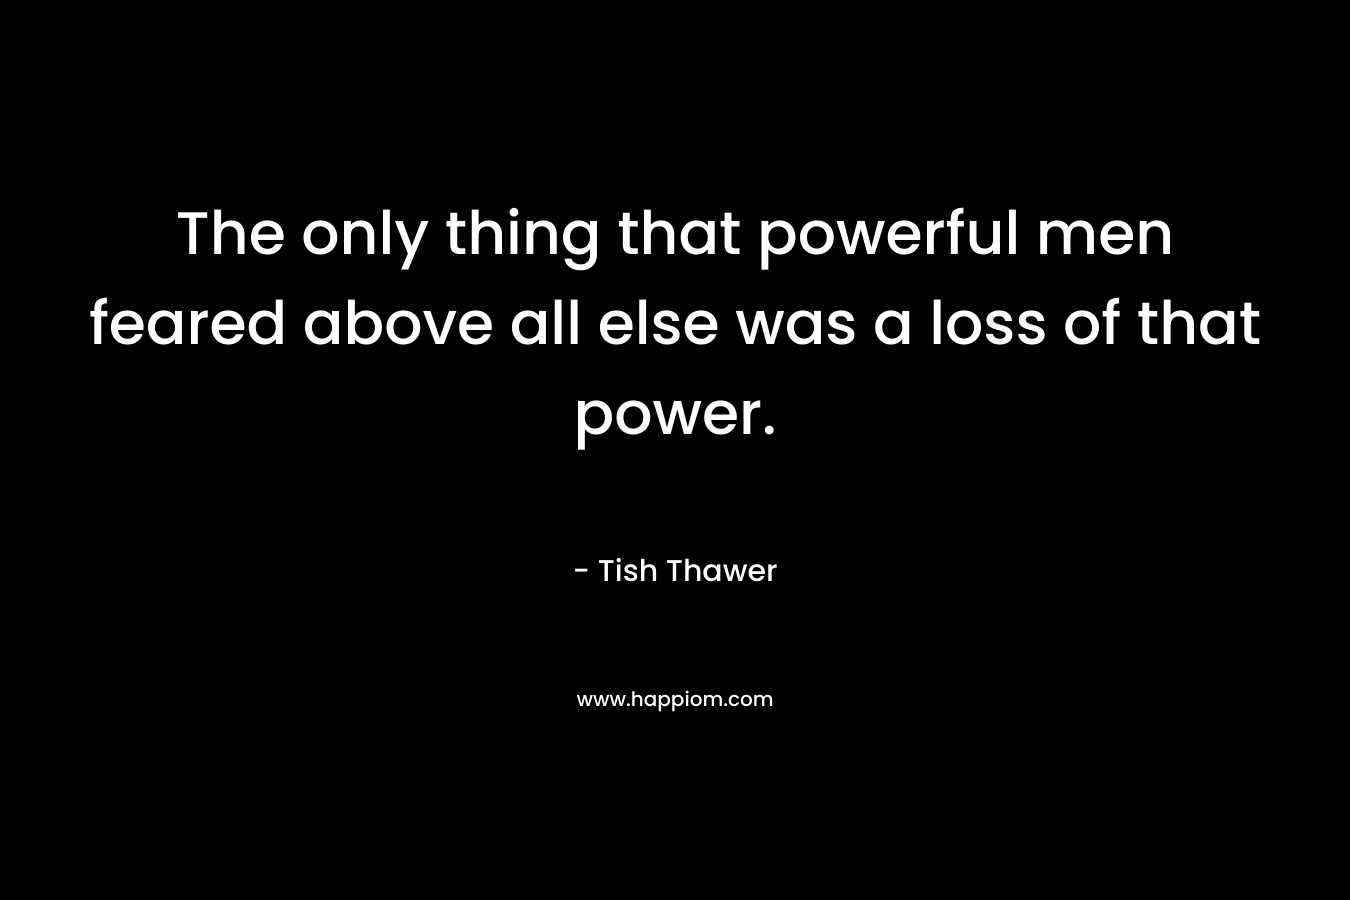 The only thing that powerful men feared above all else was a loss of that power.